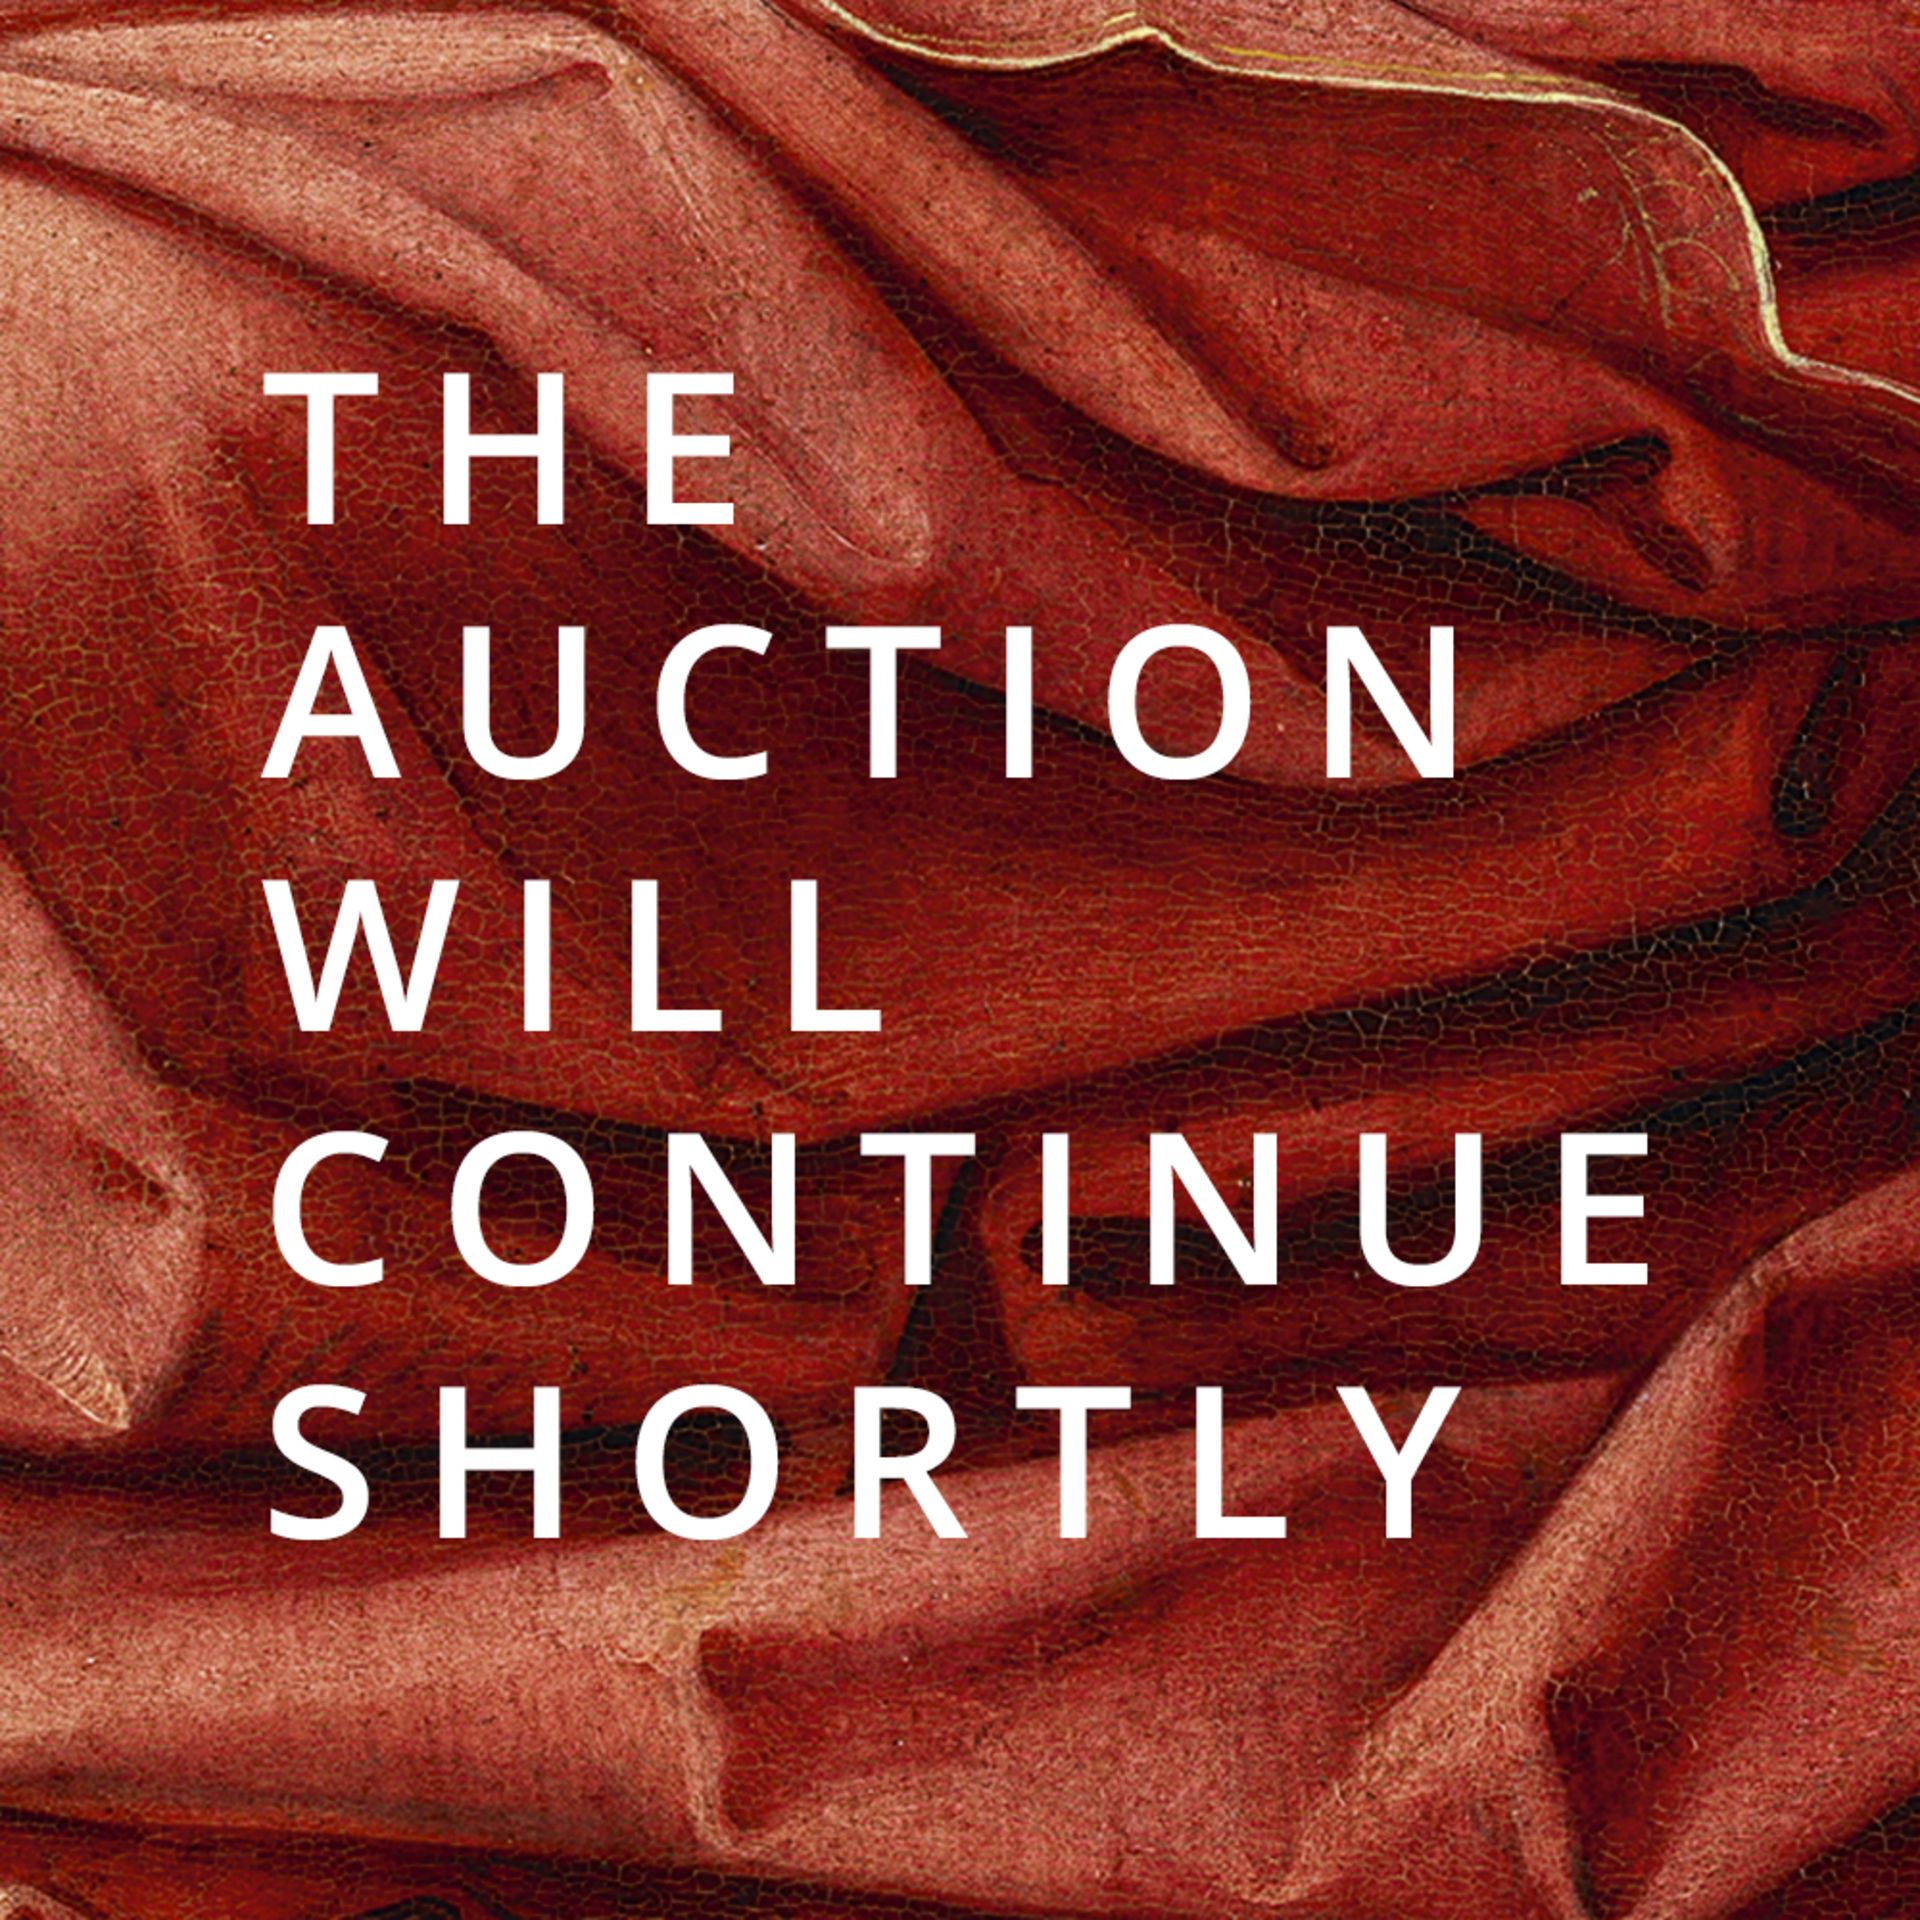 The Auction will continue shortly